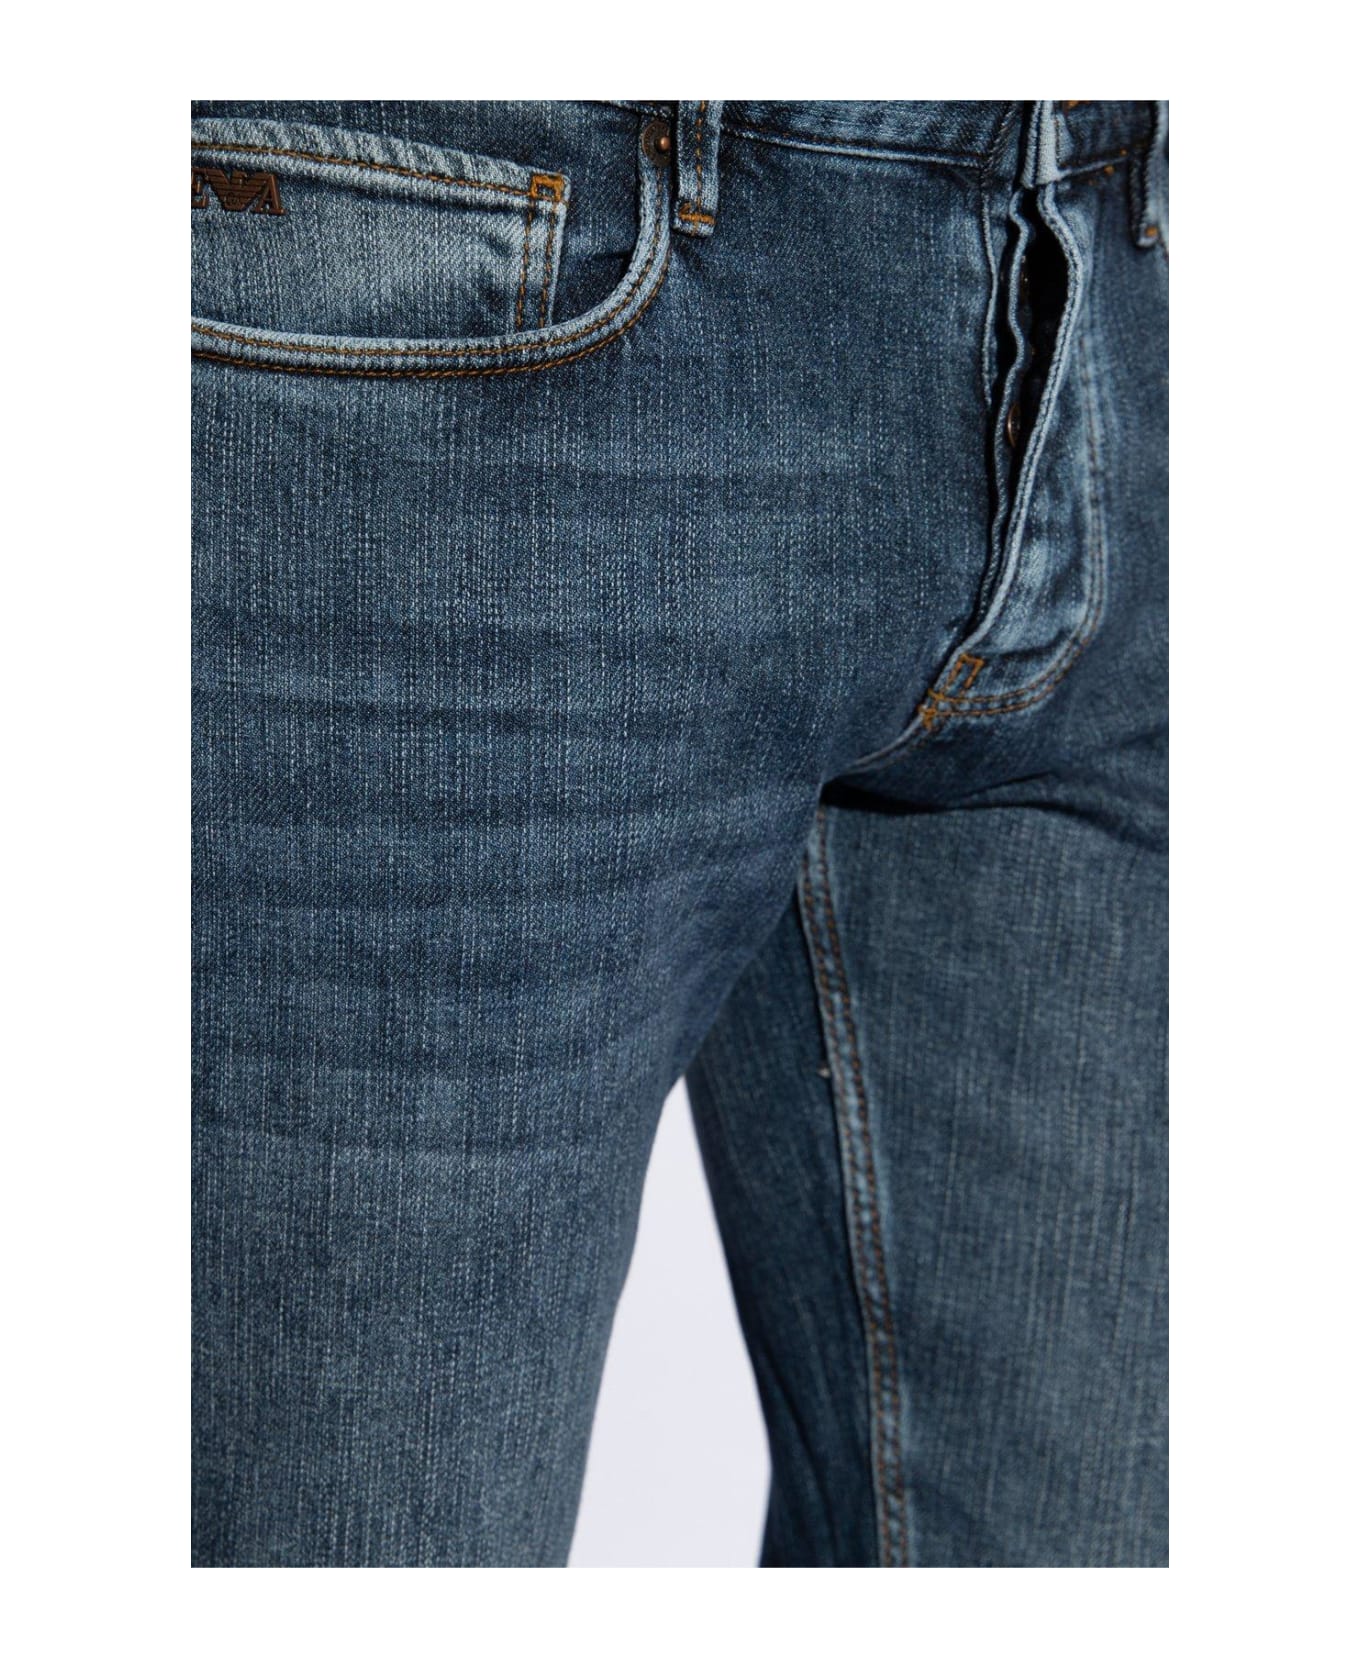 Emporio Armani Jeans With Tapered Legs - Blue デニム